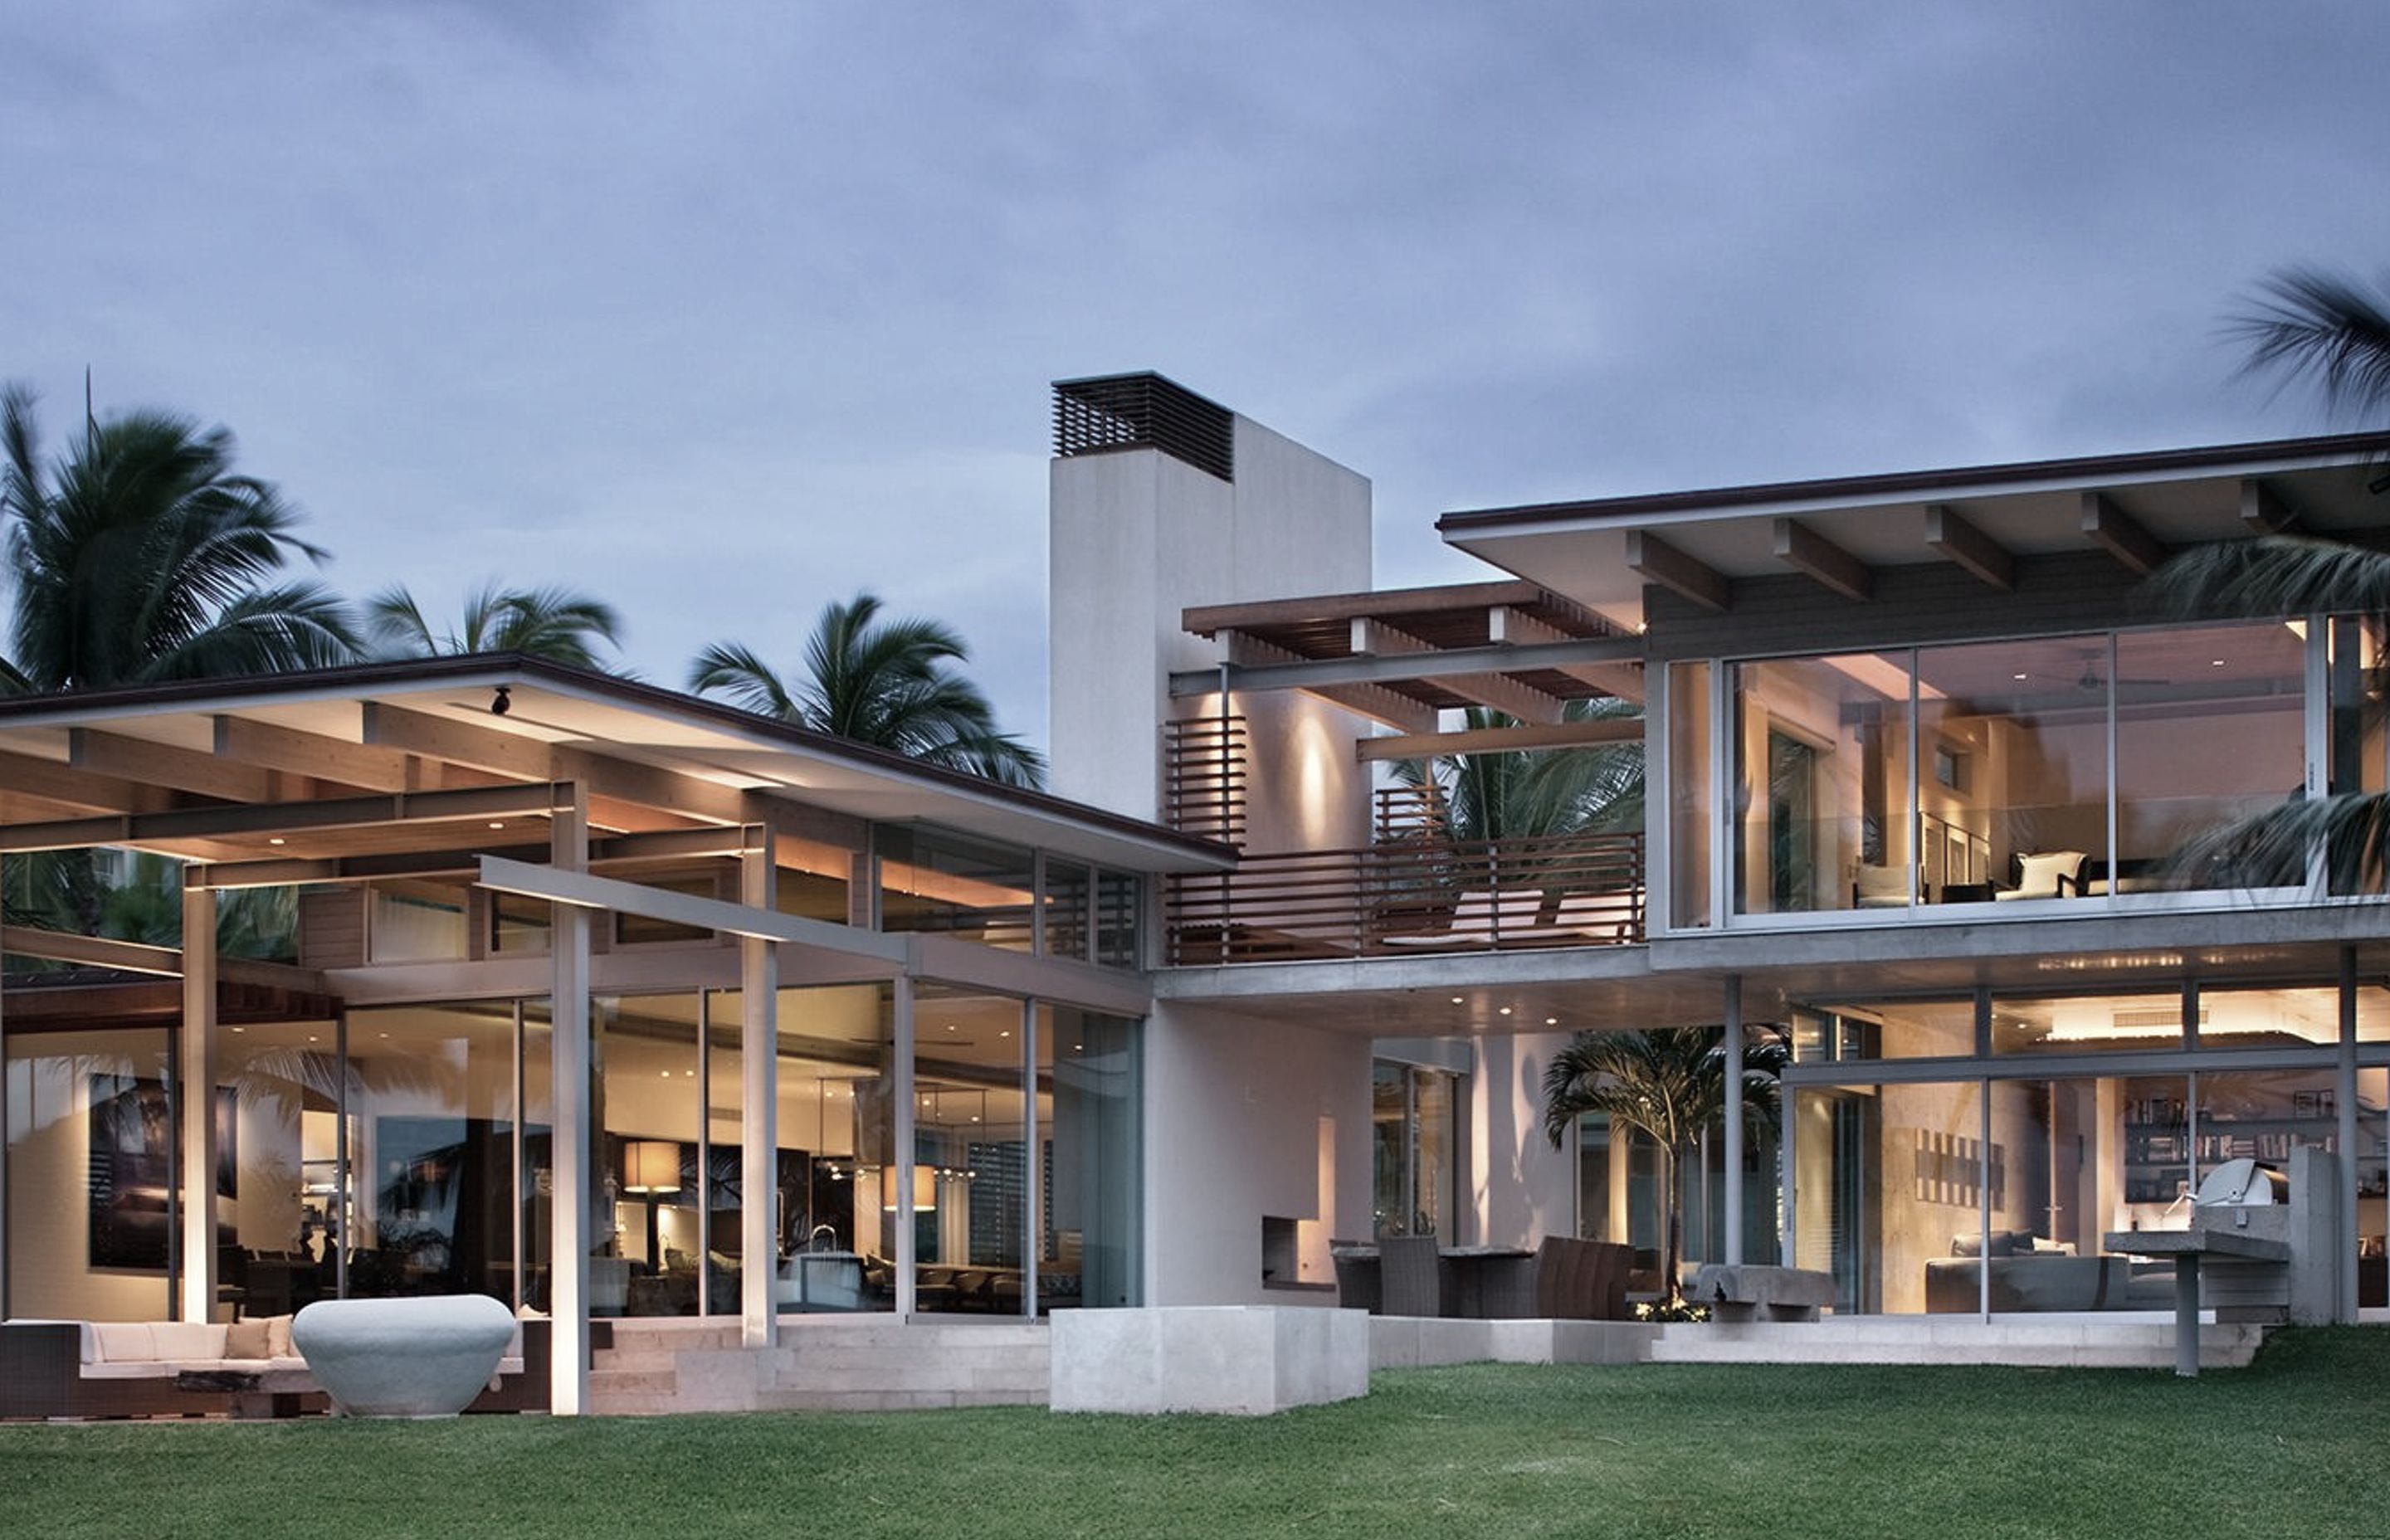 Private Residence, Maui